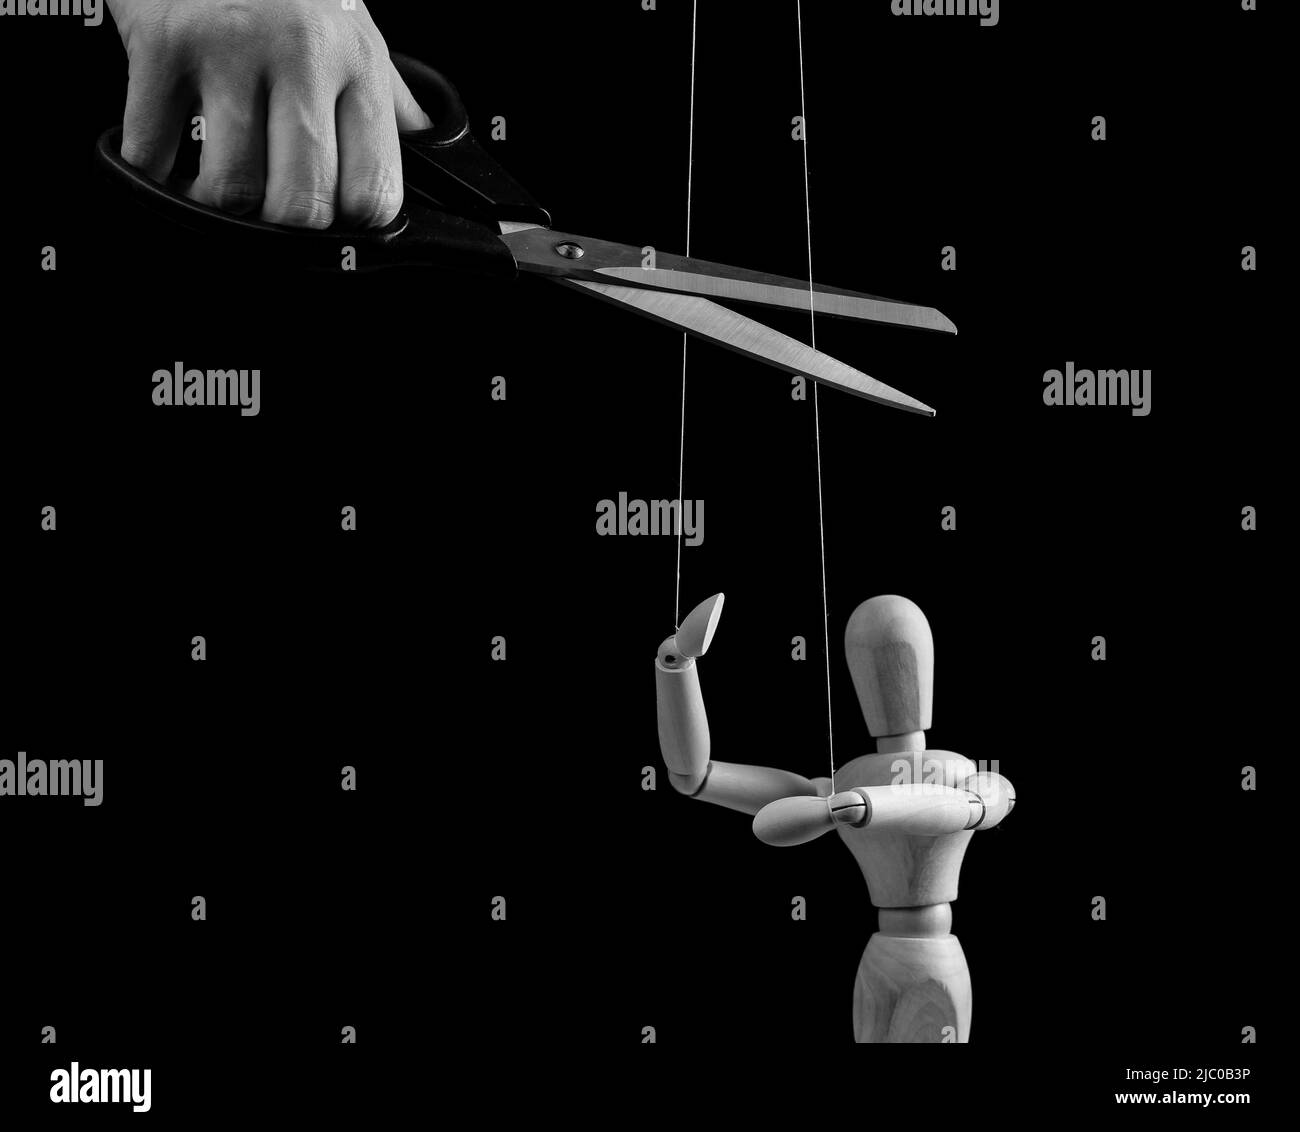 Hand cutting strings over puppet with scissors. Manipulation, negative influence, control stop concept. Overcoming addiction. Black and white. High quality photo Stock Photo